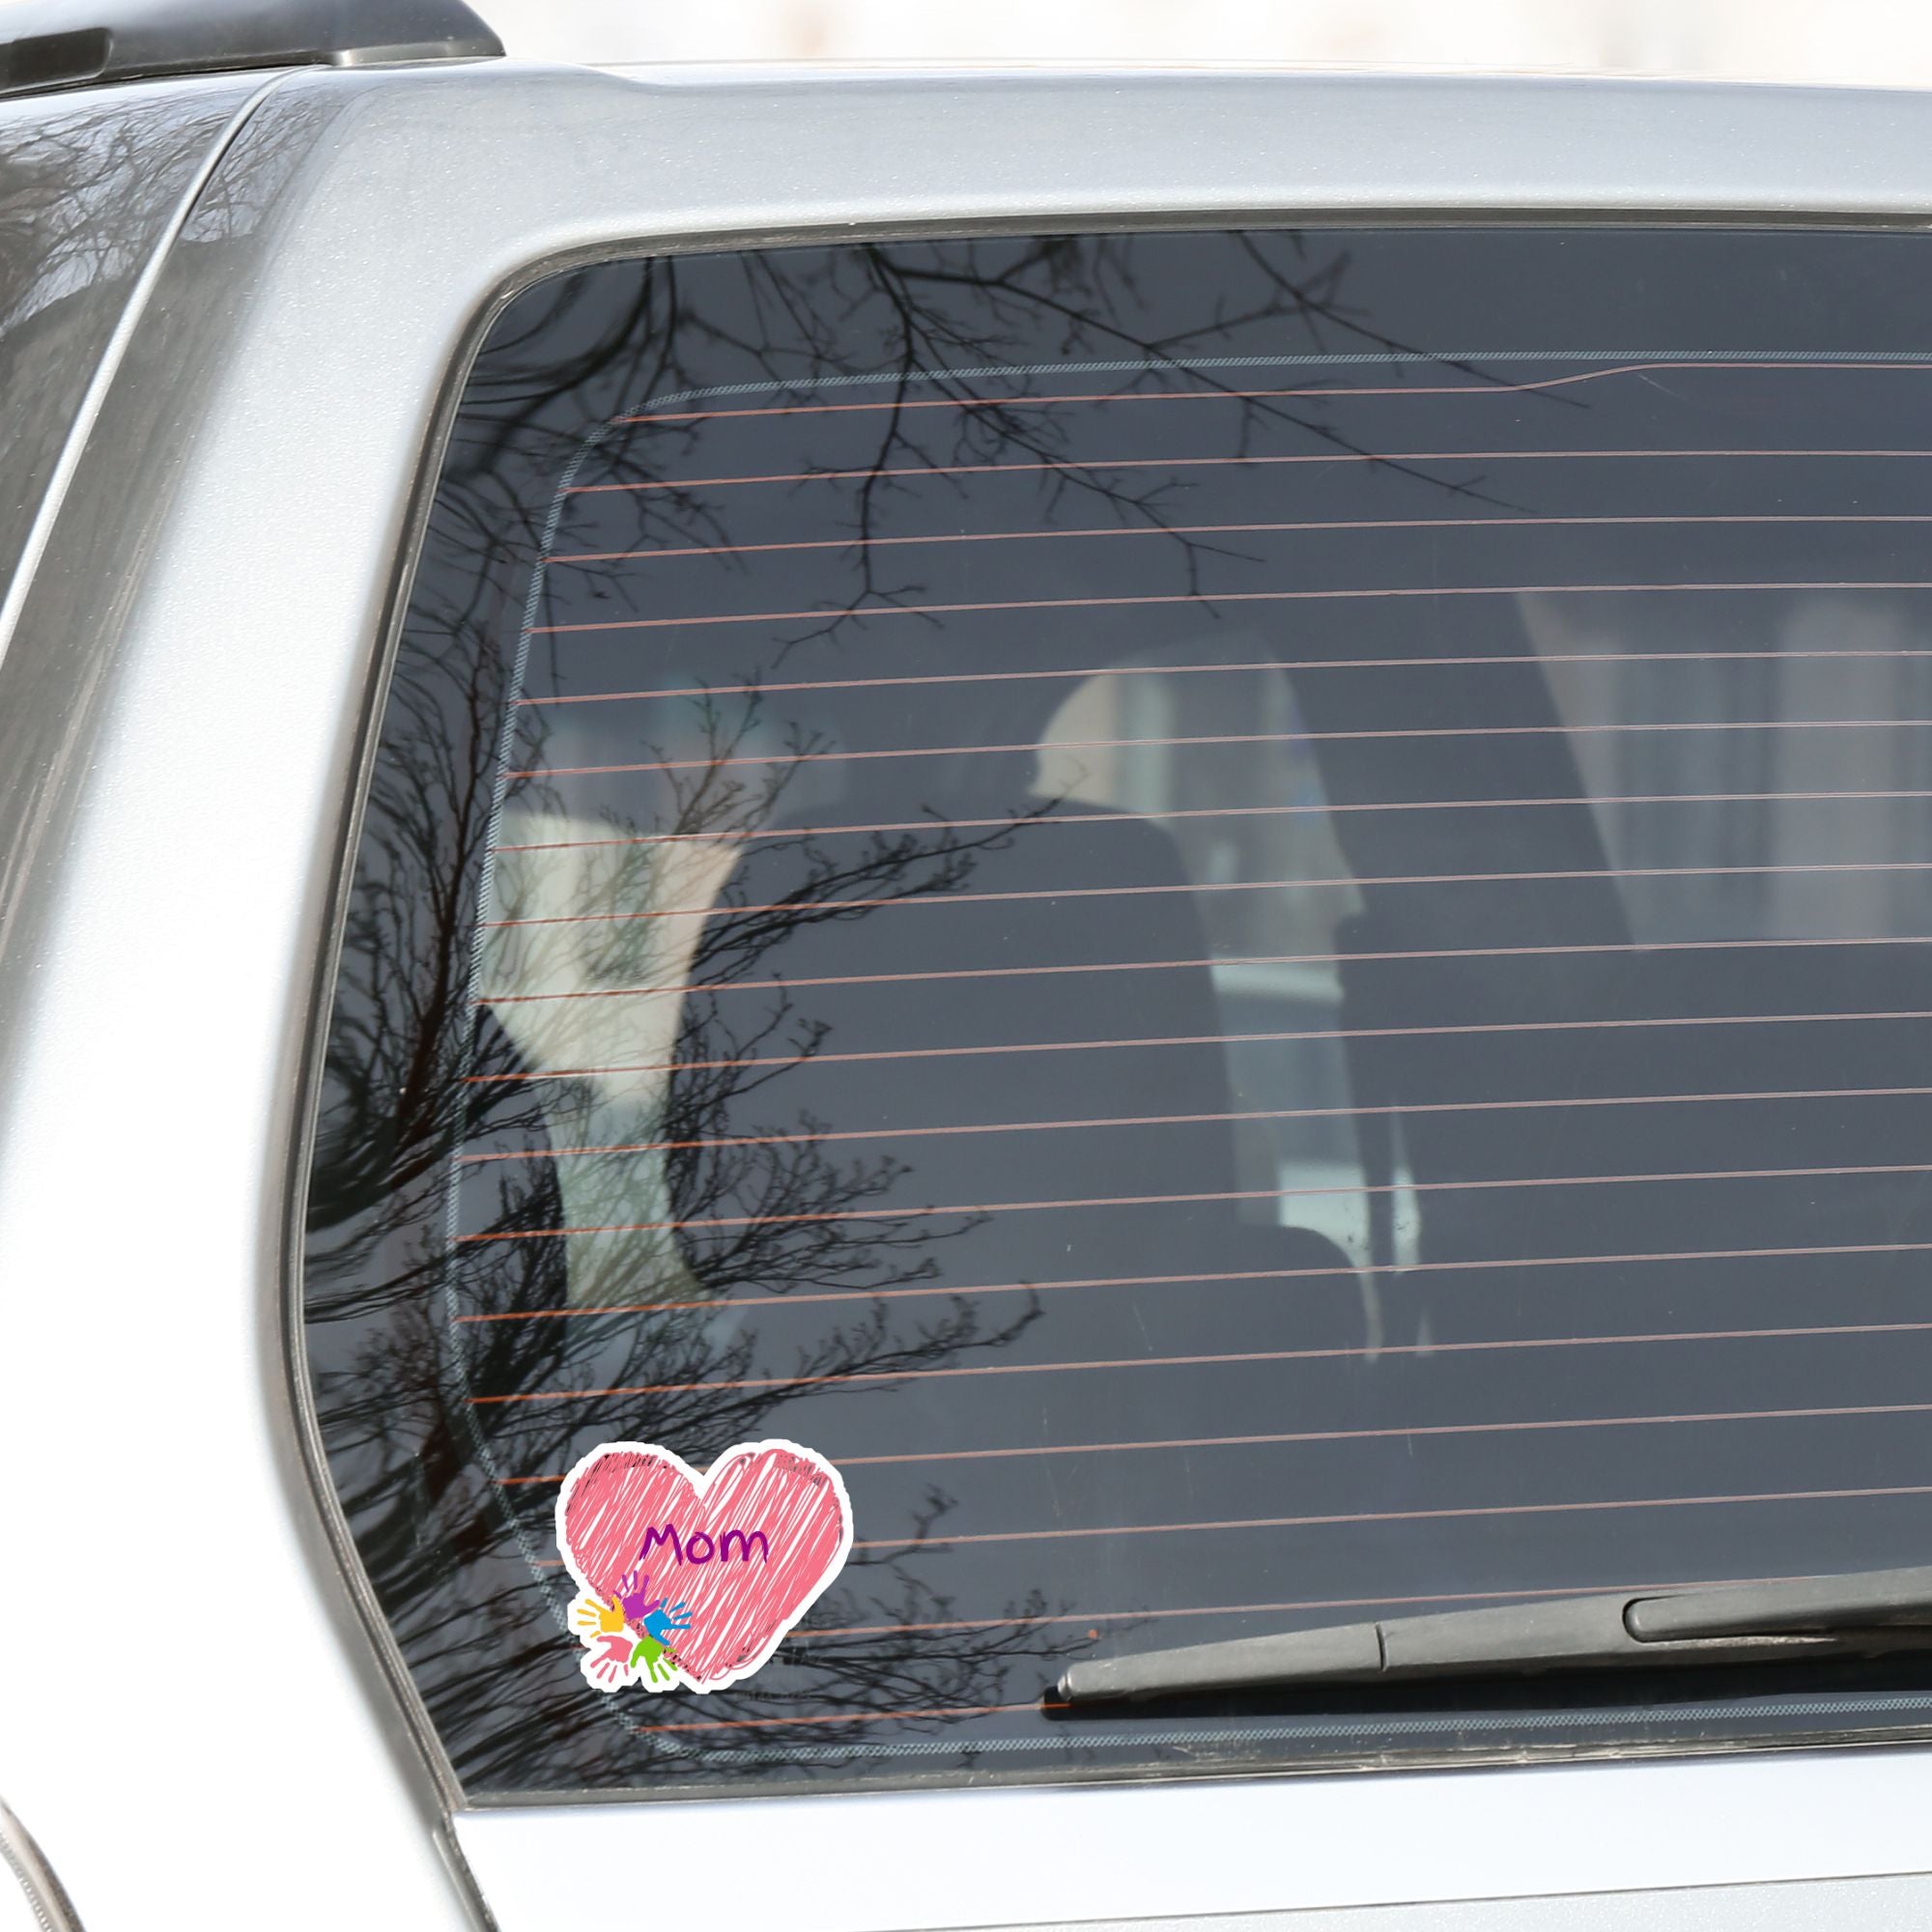 Show how much you love your mom with this individual die-cut sticker. This makes a great gift for mom, or for all mom's to proudly show they are a mother! This sticker features a pink scribbled heart with Mom written across the middle and 5 small paint hands on the lower left side. This image shows the Mom sticker on the back window of a car.